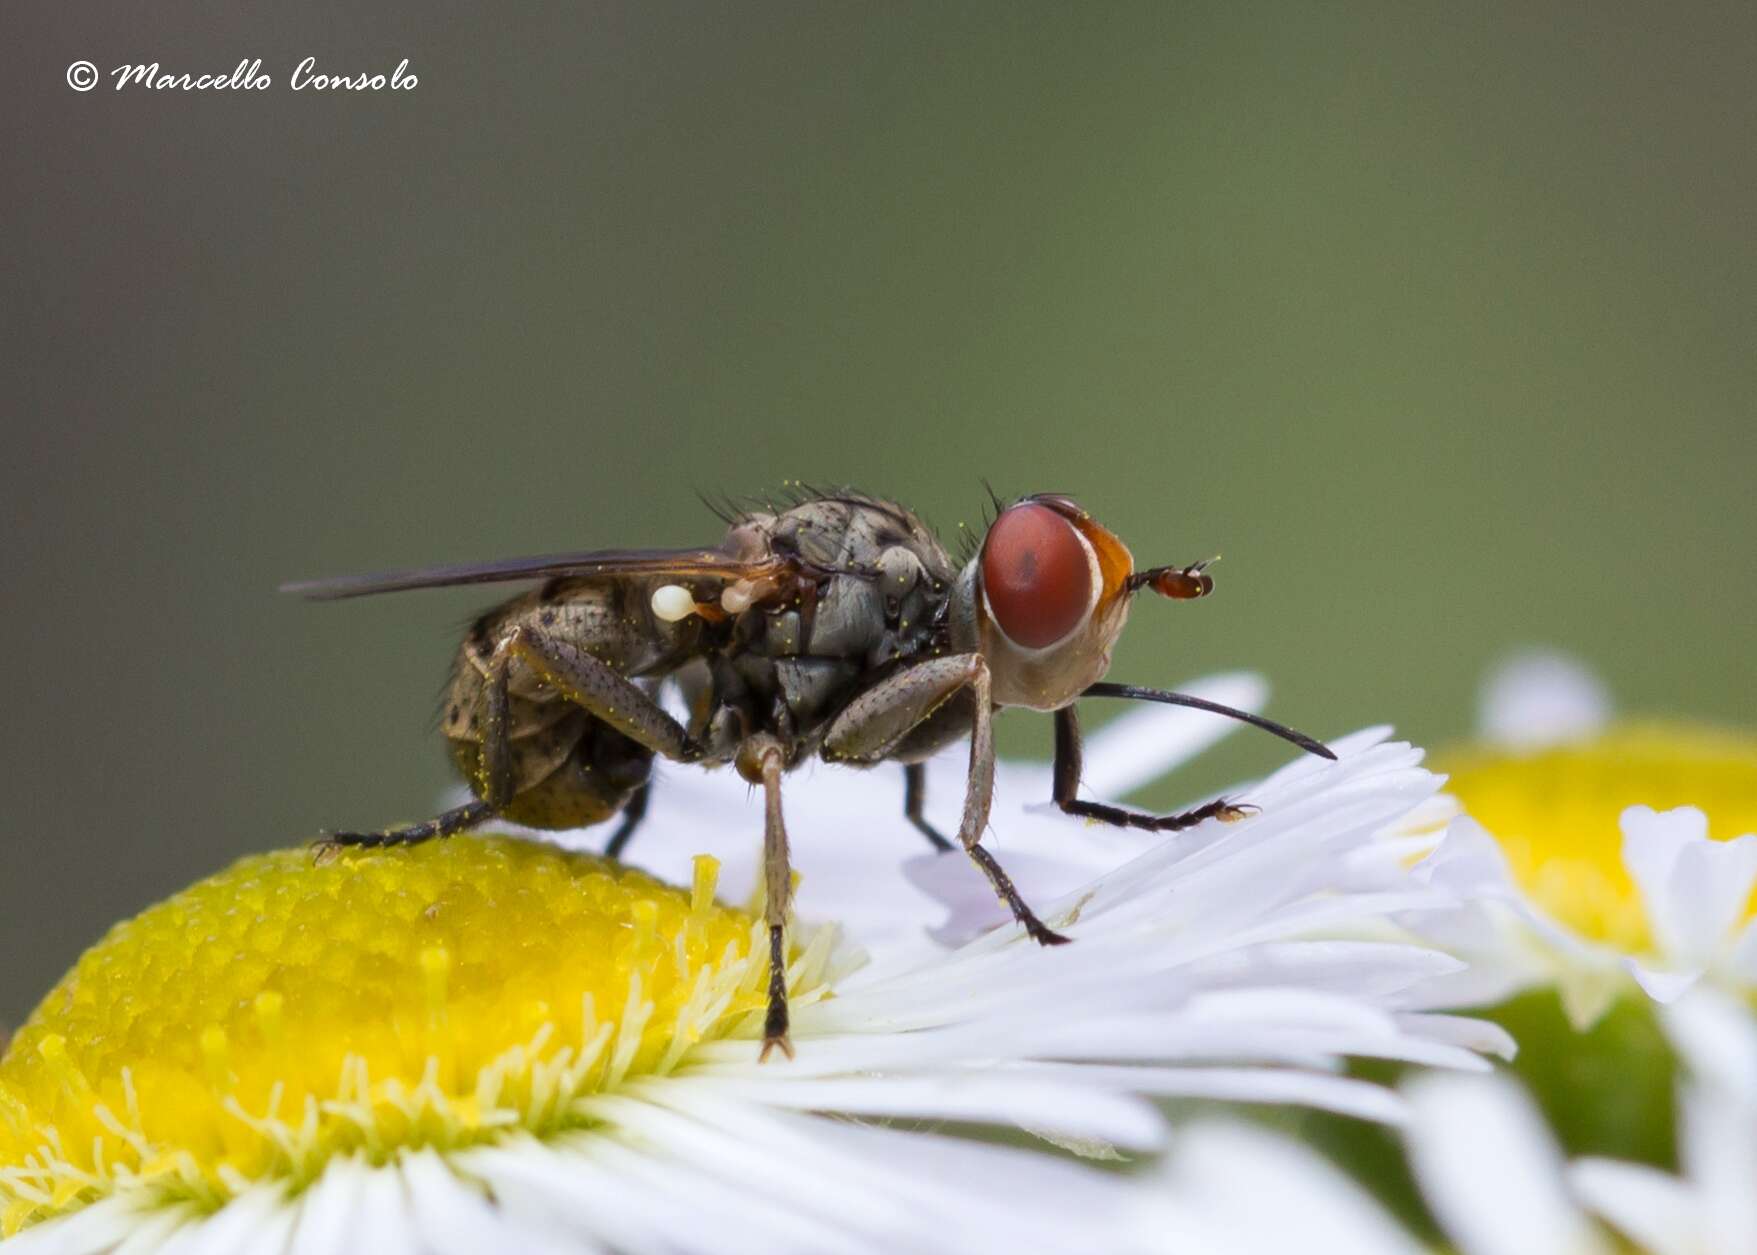 Image of thick-headed flies